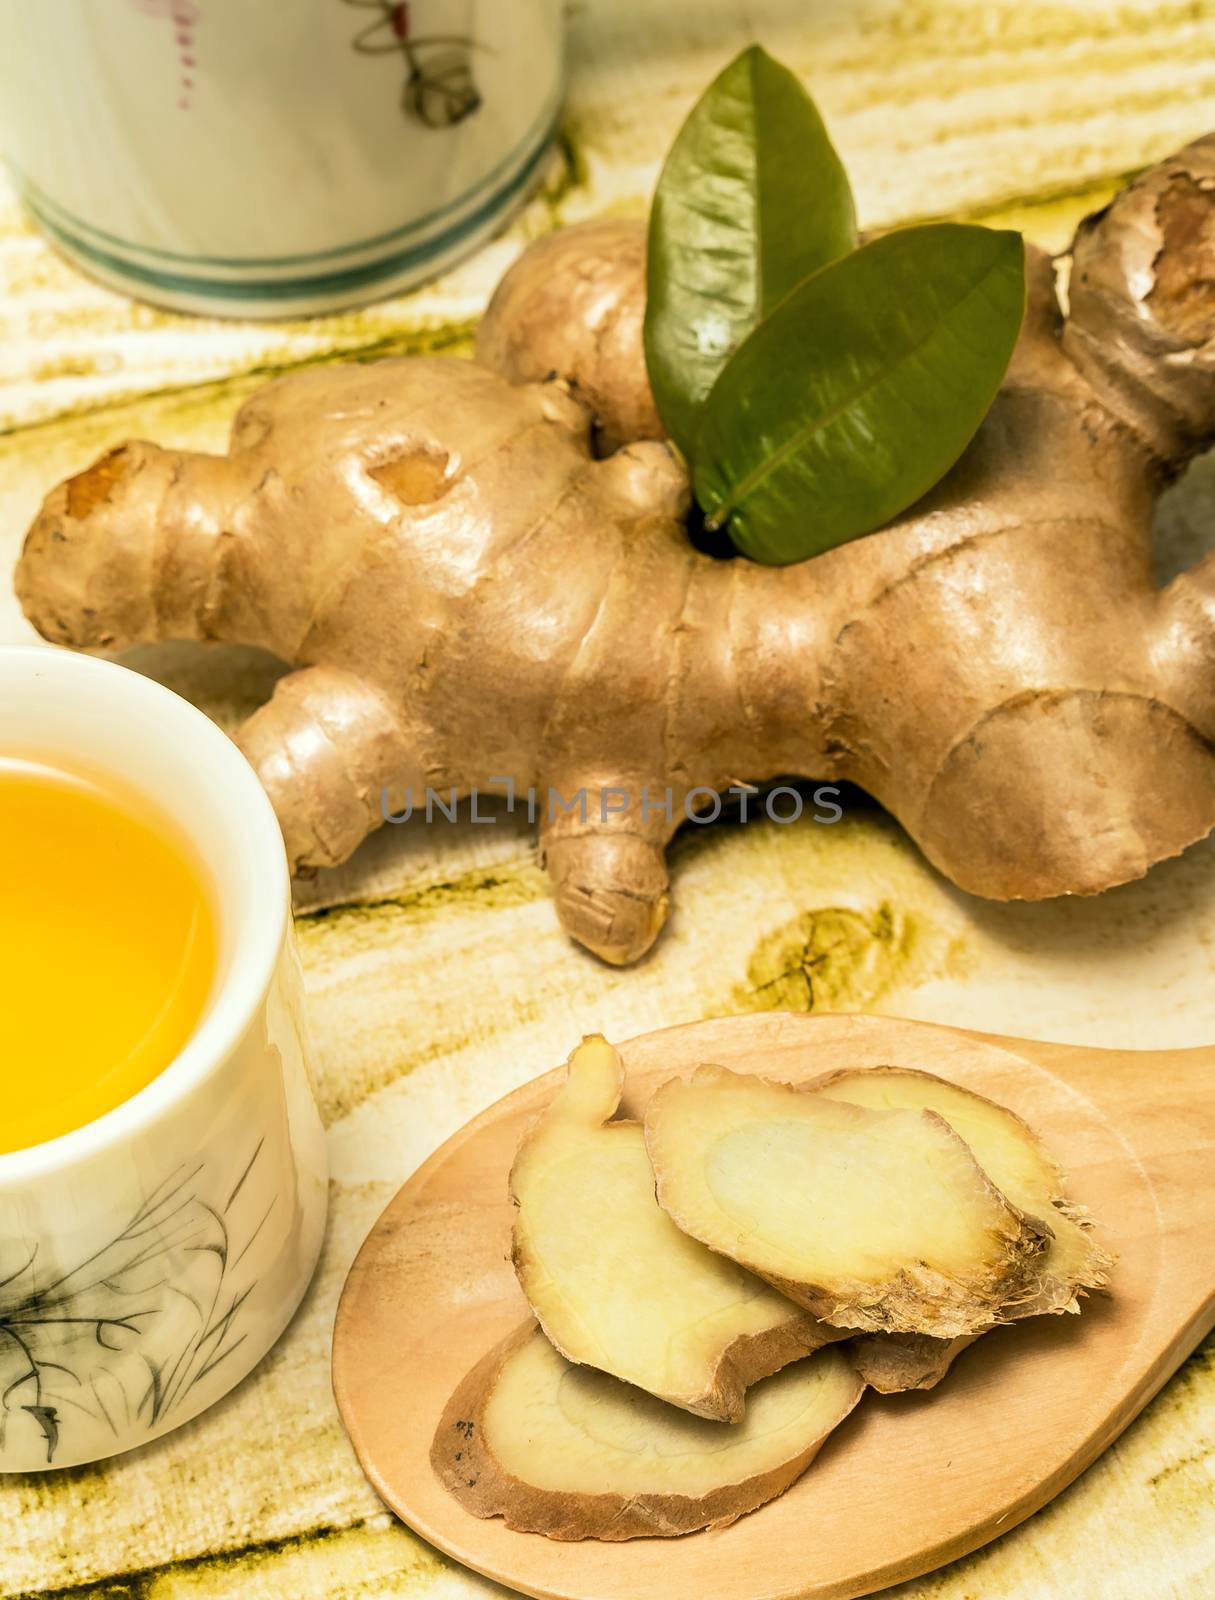 Outdoor Ginger Tea Shows Beverages Refreshment And Organic  by stuartmiles